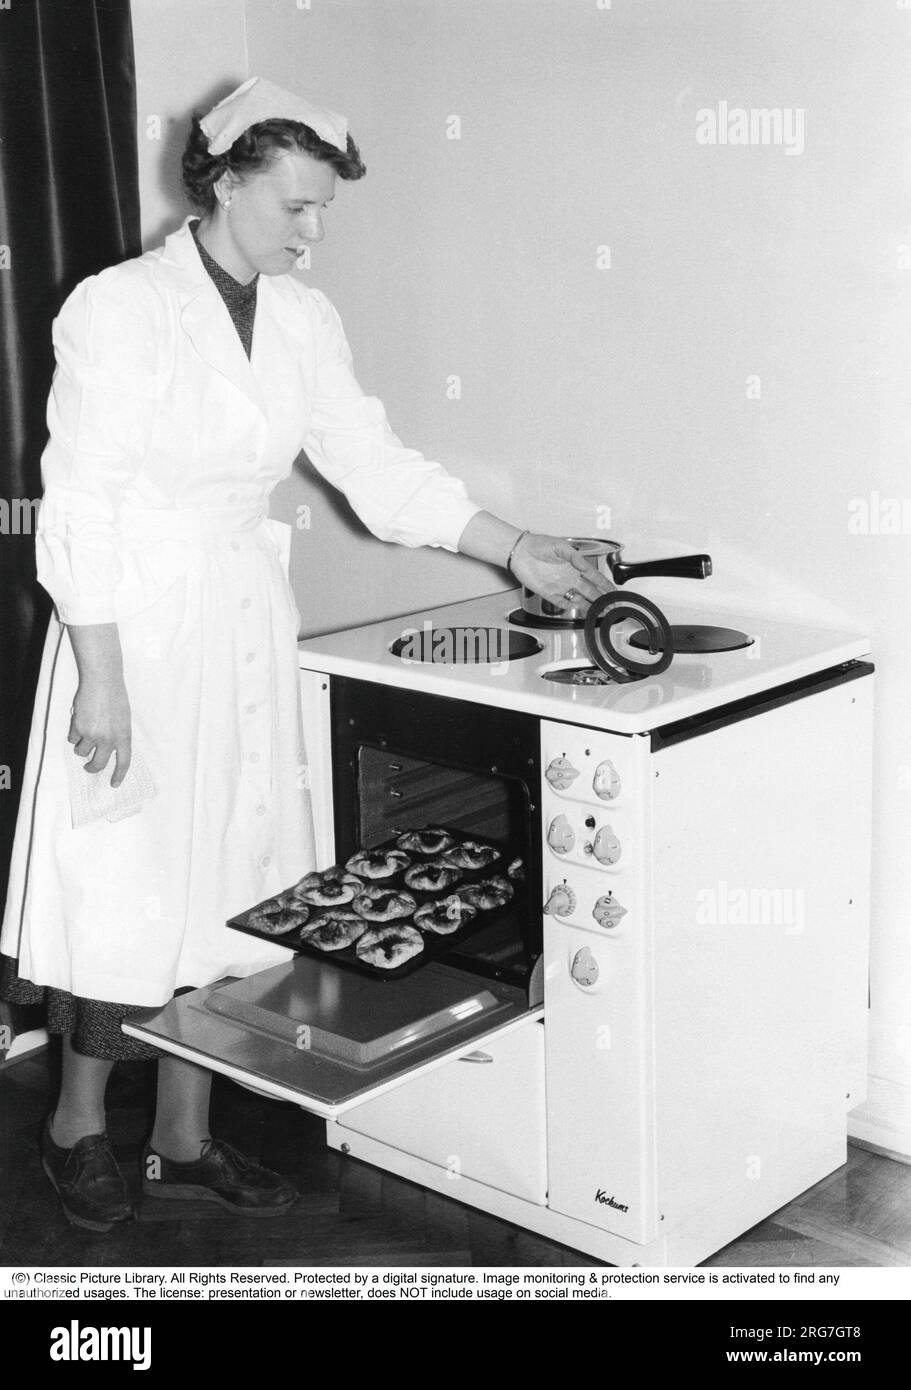 In the kitchen in the 1950s. A young woman in the kitchen at the brand new Kockums electric cooker. She is seen demonstrating the practical function of lifting the hotplate in order to clean properly under and around it. A plate of freshly baked pastries is visible. Sweden 1957 Stock Photo